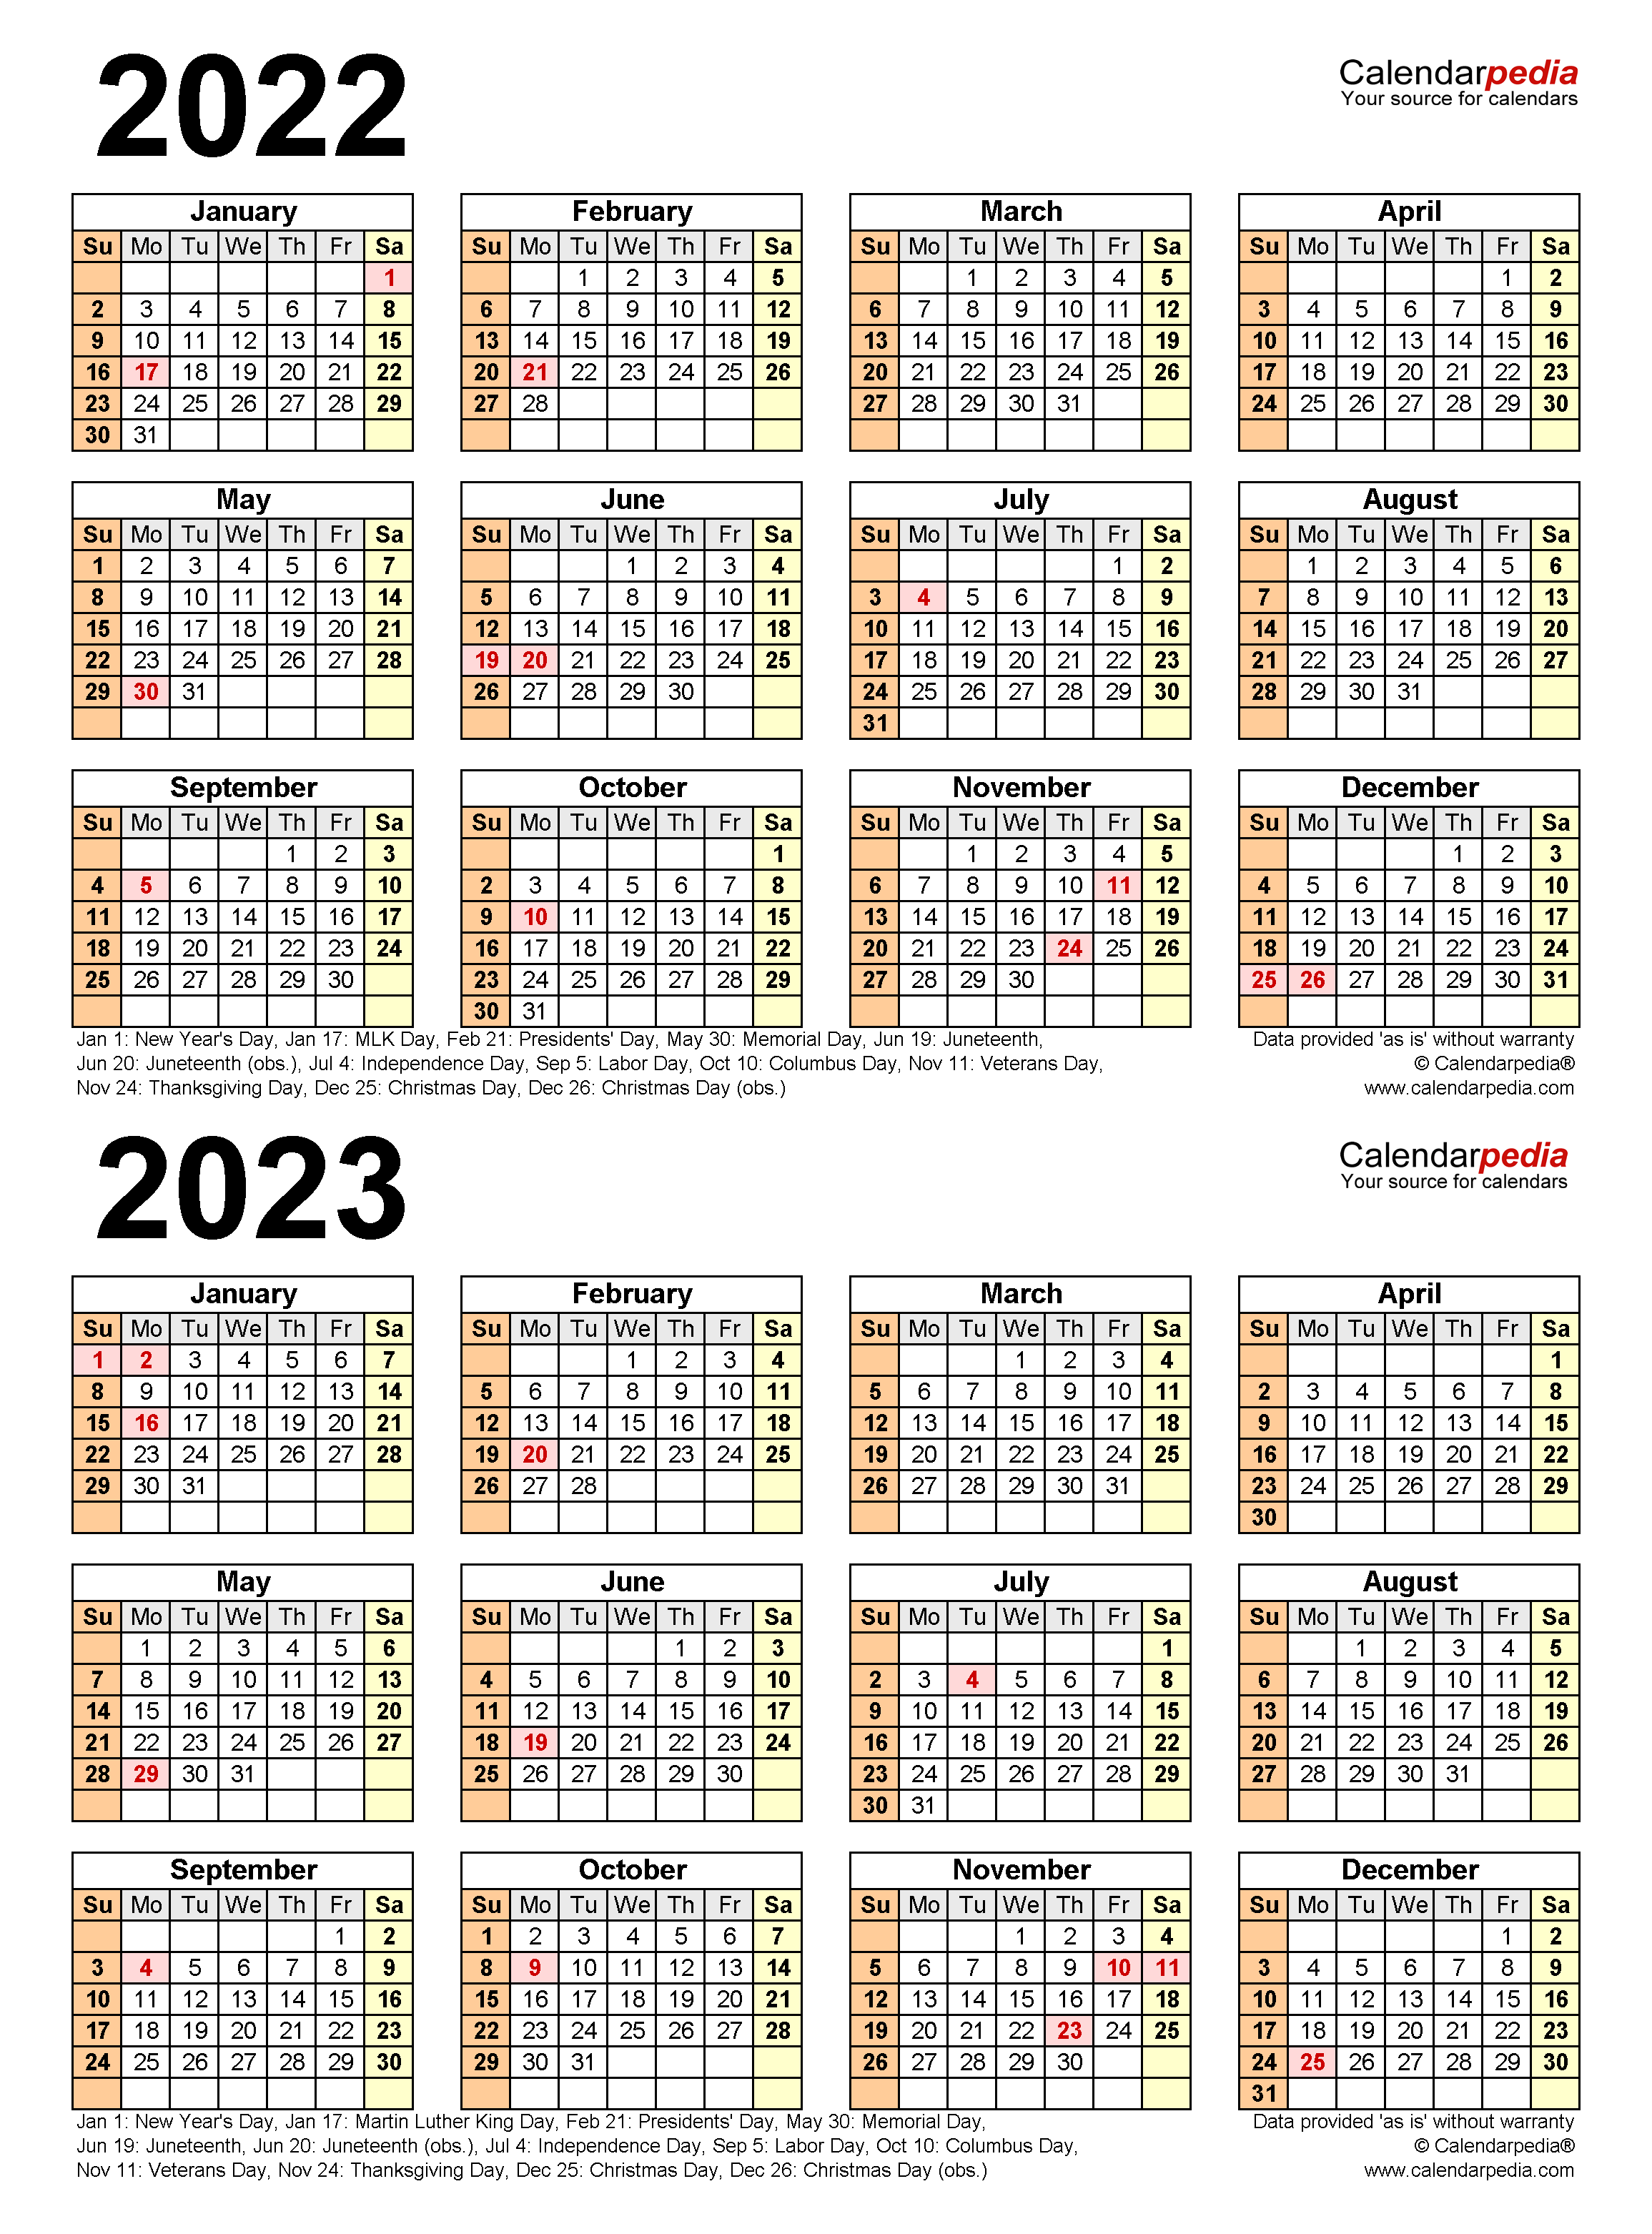 lewisville-isd-calendar-2022-23-customize-and-print